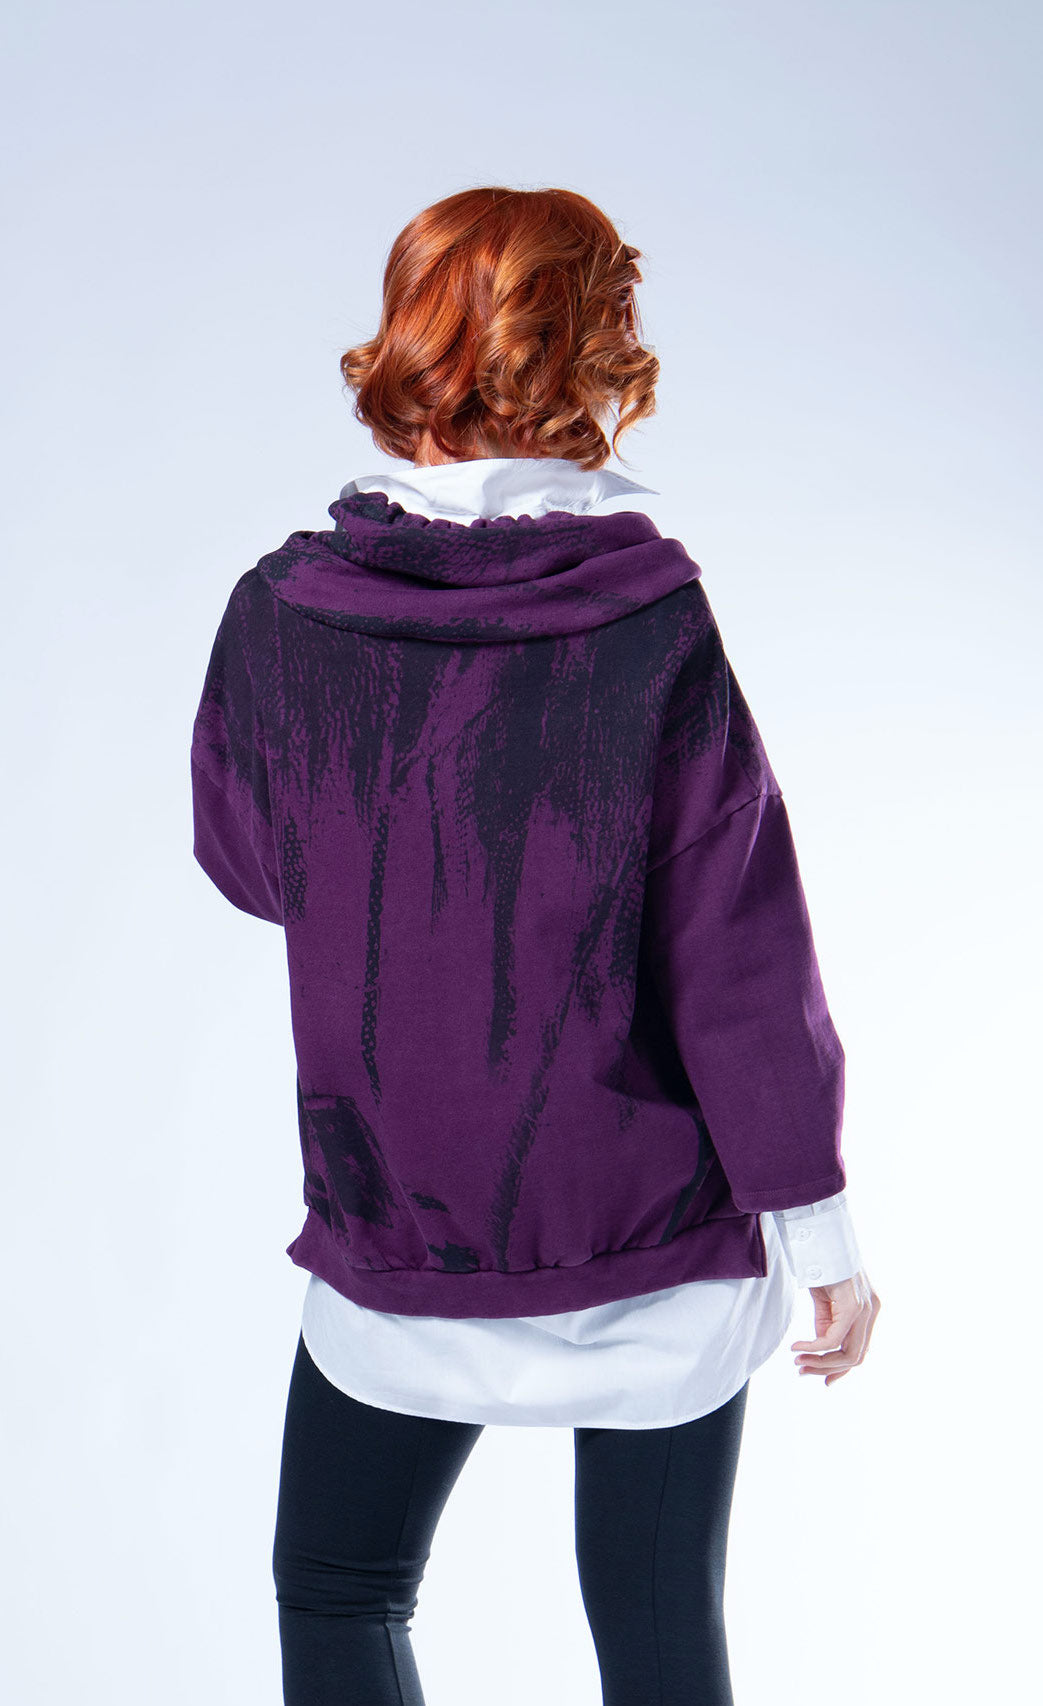 Back top half view of a woman wearing the luukaa aubergine sweatshirt with a faded black print. This sweatshirt has an oversized fit, drop shoulders, and 3/4 length sleeves. The sweatshirt also has a hood and a ribbed hem.